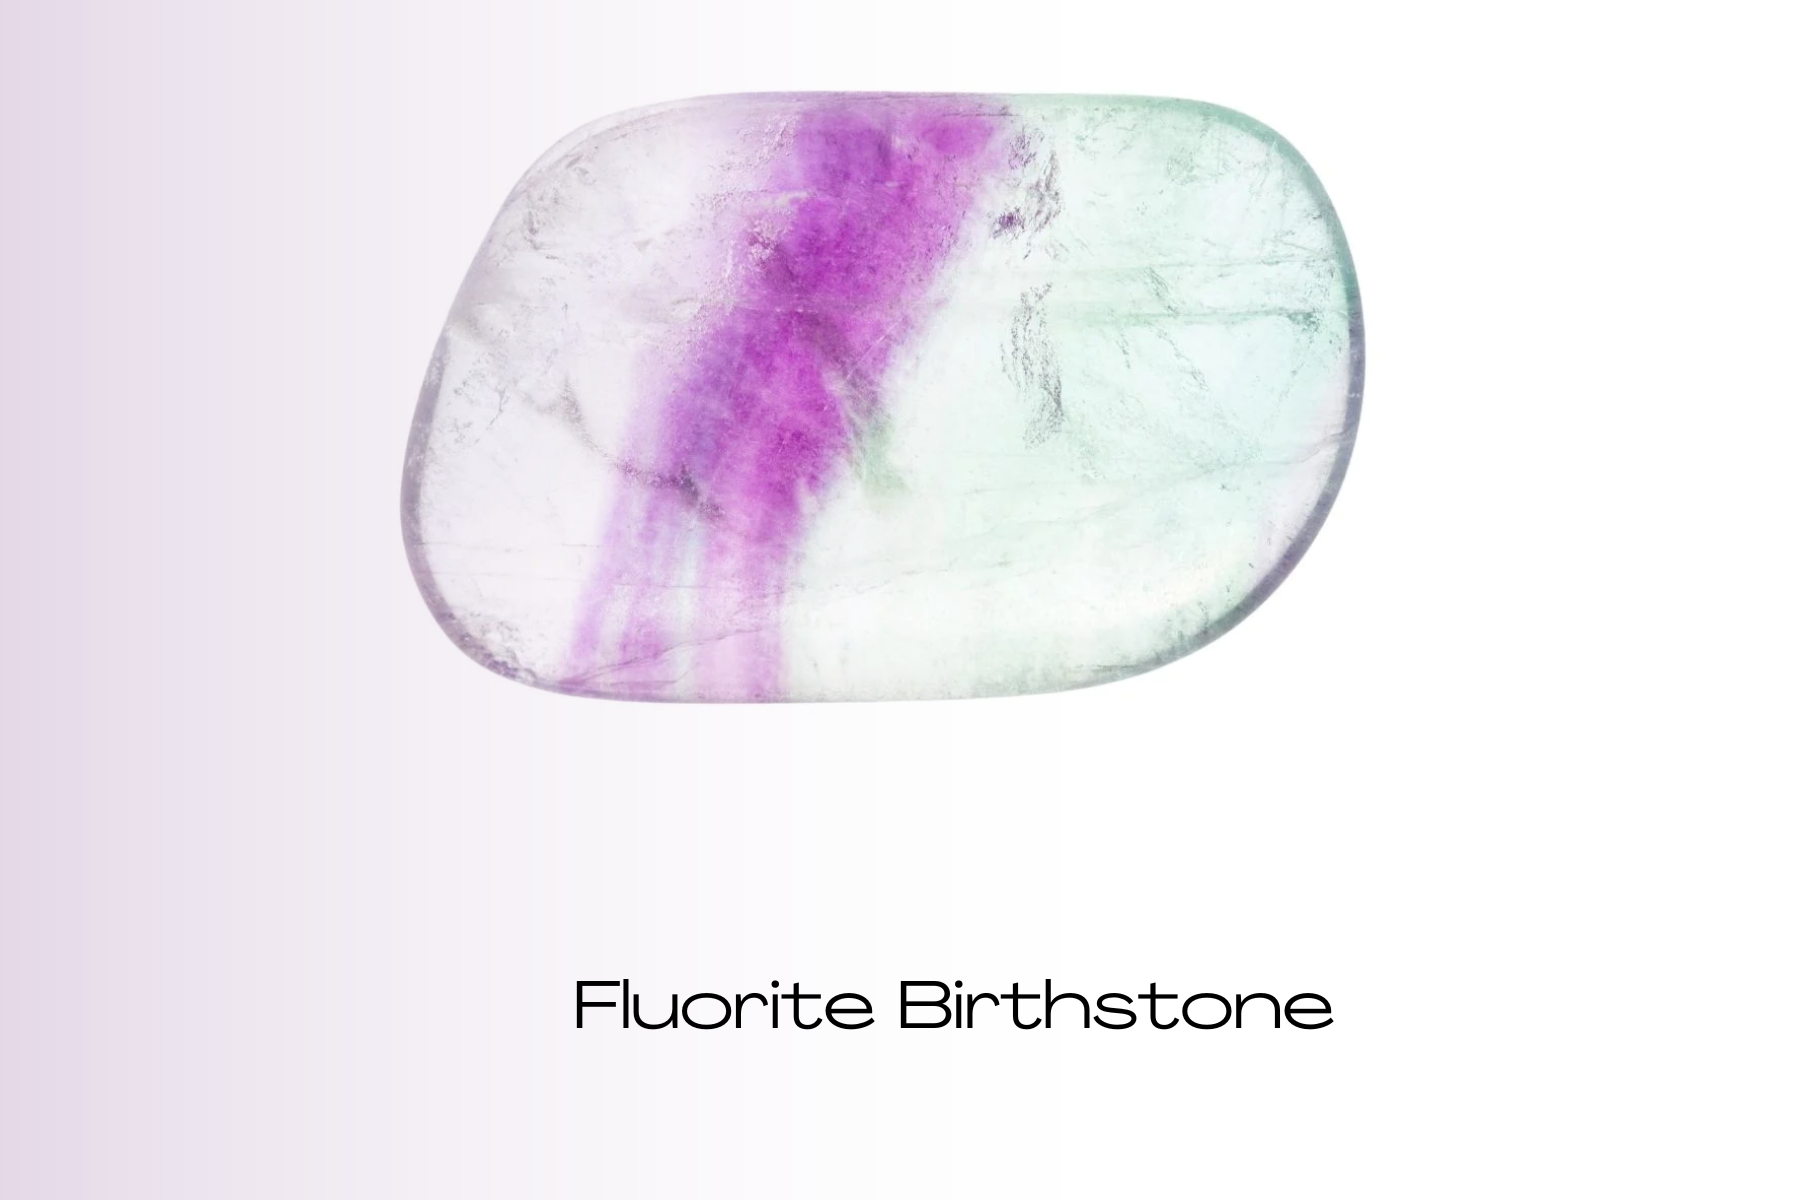 Transparent fluorite stone with a touch of violet hue